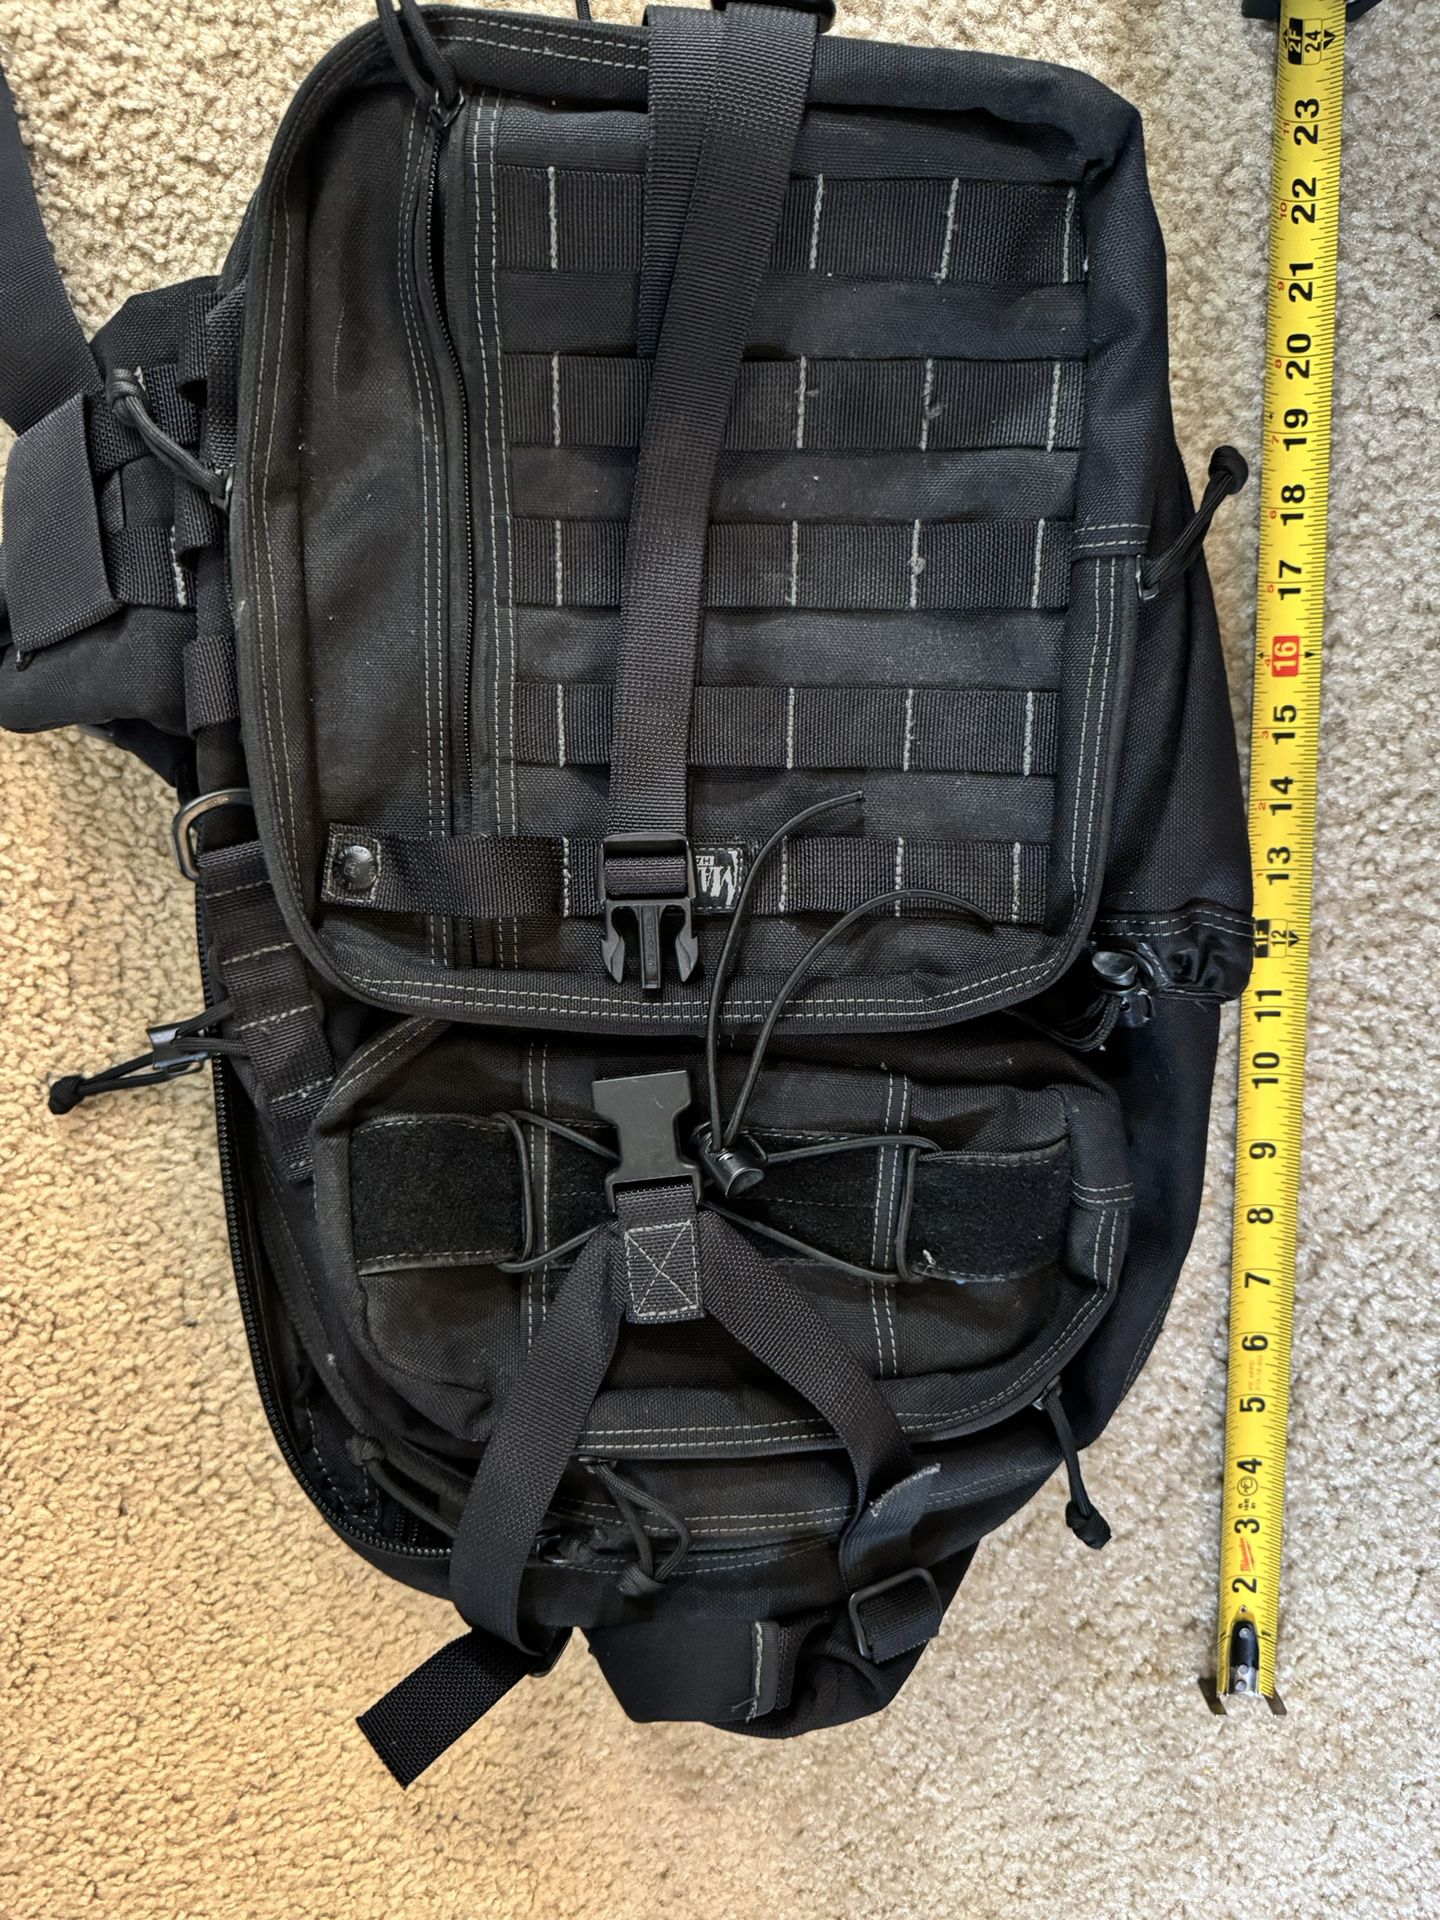 TWO BACKPACKS For The Price Of One  Combat Tactical Bag Pack Carrying Pouch BLK Molle Multi-function Bag Single Strap 